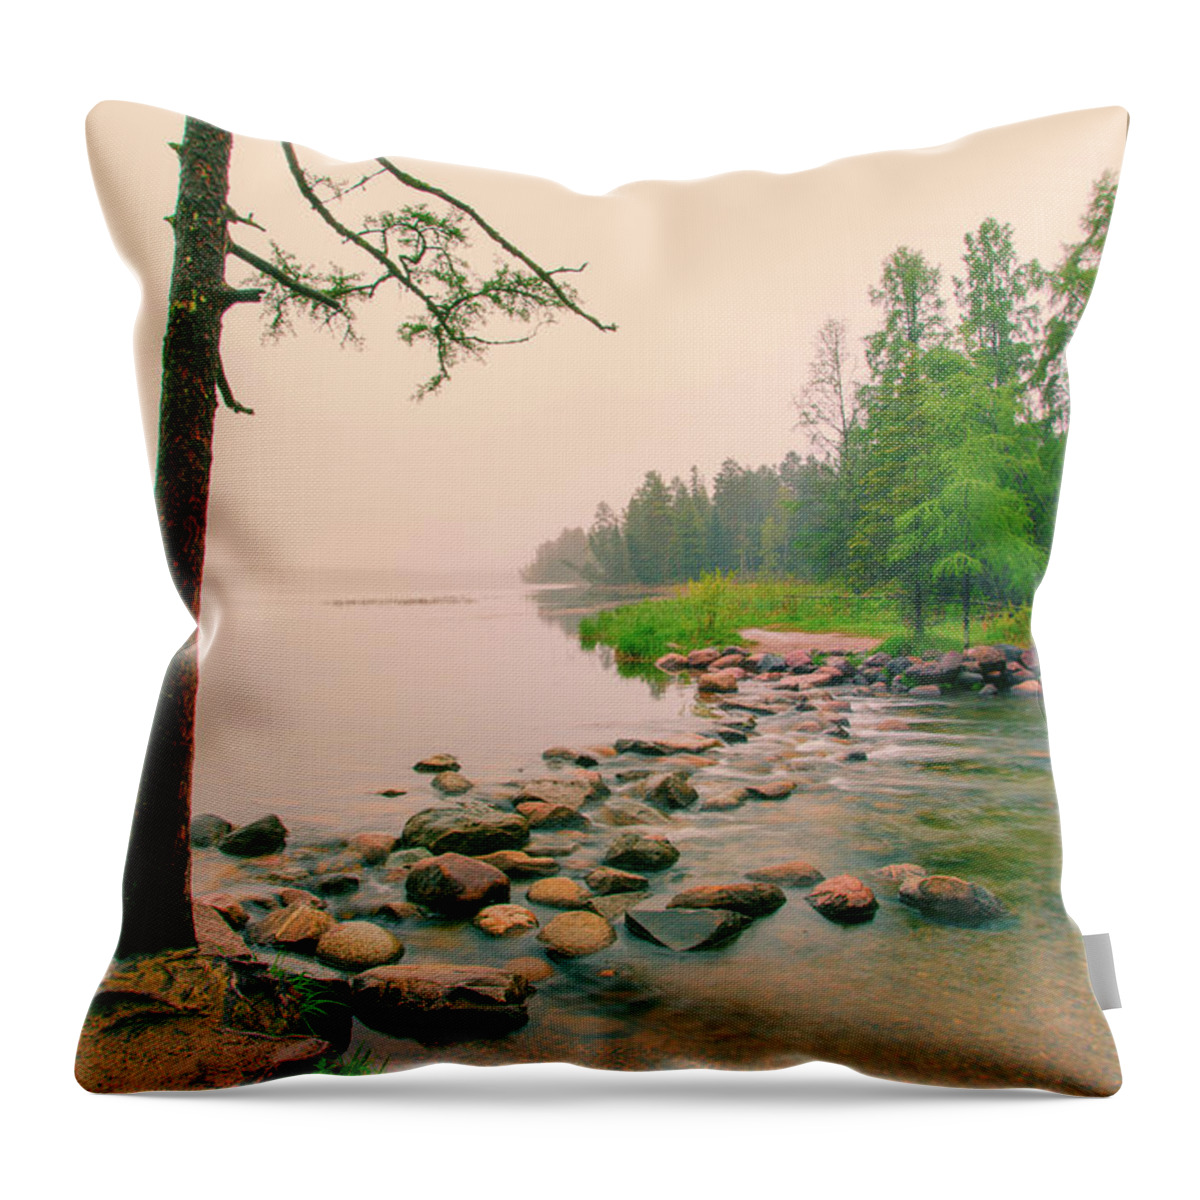 Mississippi Headwaters Throw Pillow featuring the photograph Nostalgic Mississippi Headwaters by Nancy Dunivin